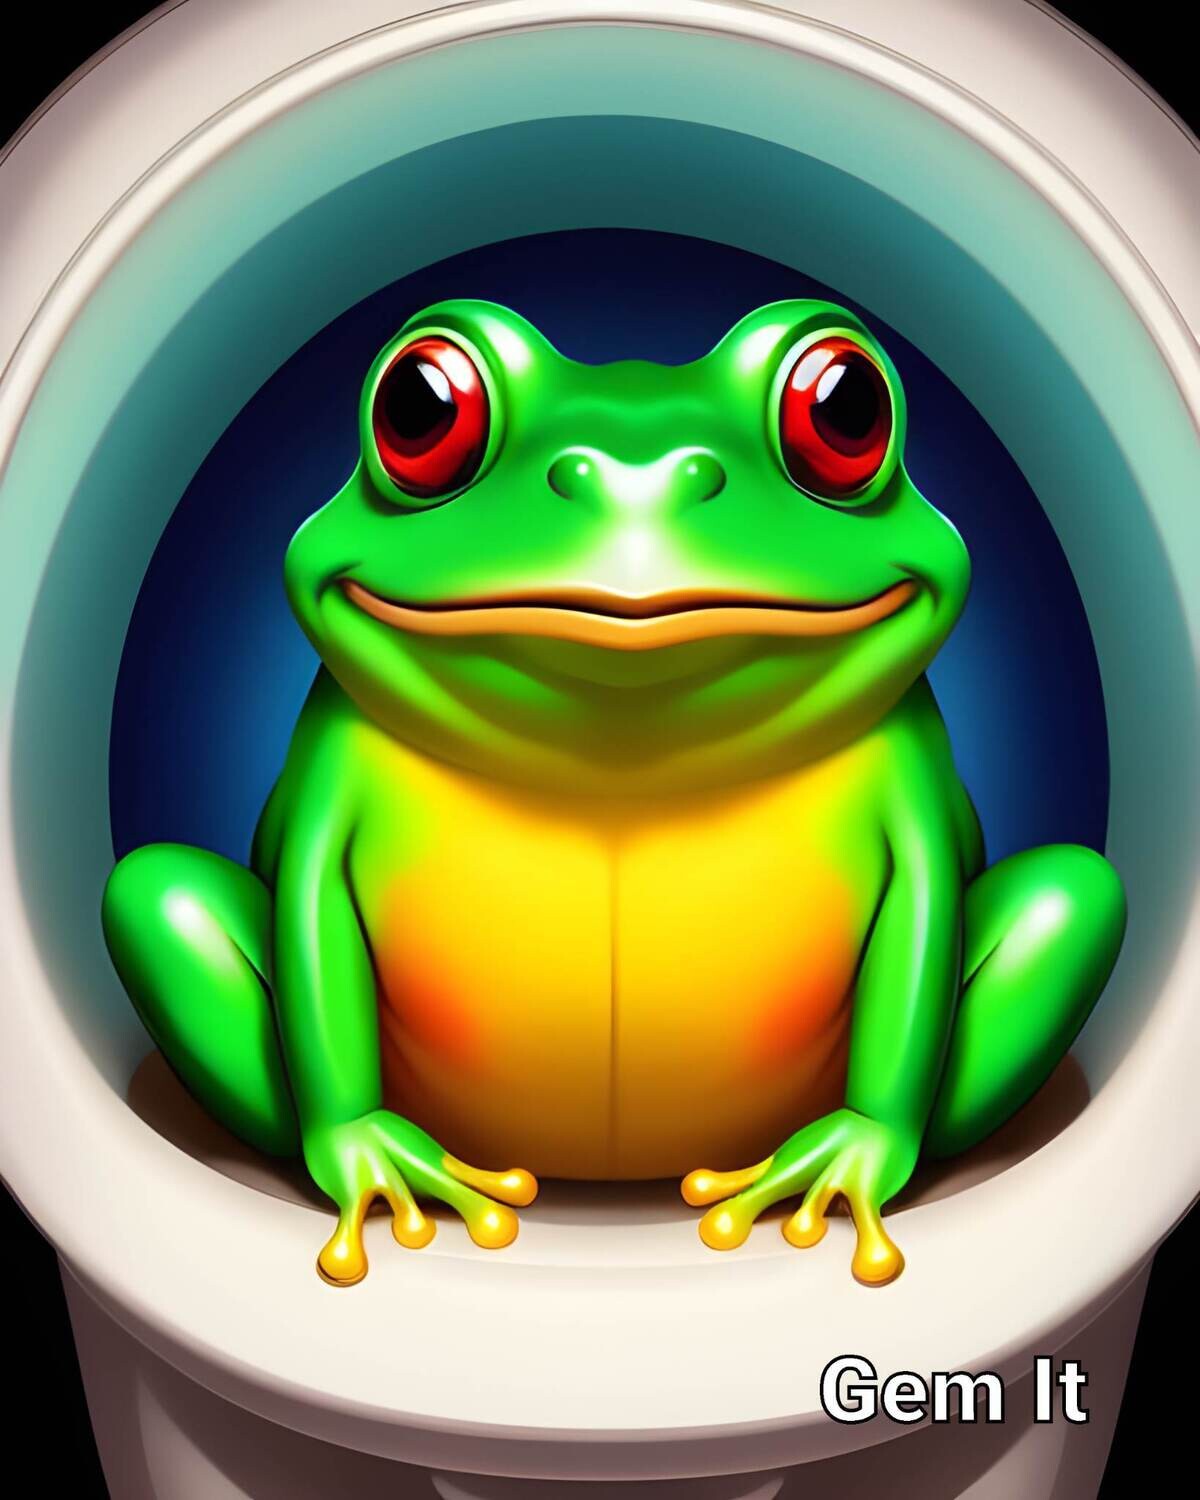 Frog on a Toilet 2 - Specially ordered for you. Delivery is approximately 4 - 6 weeks.